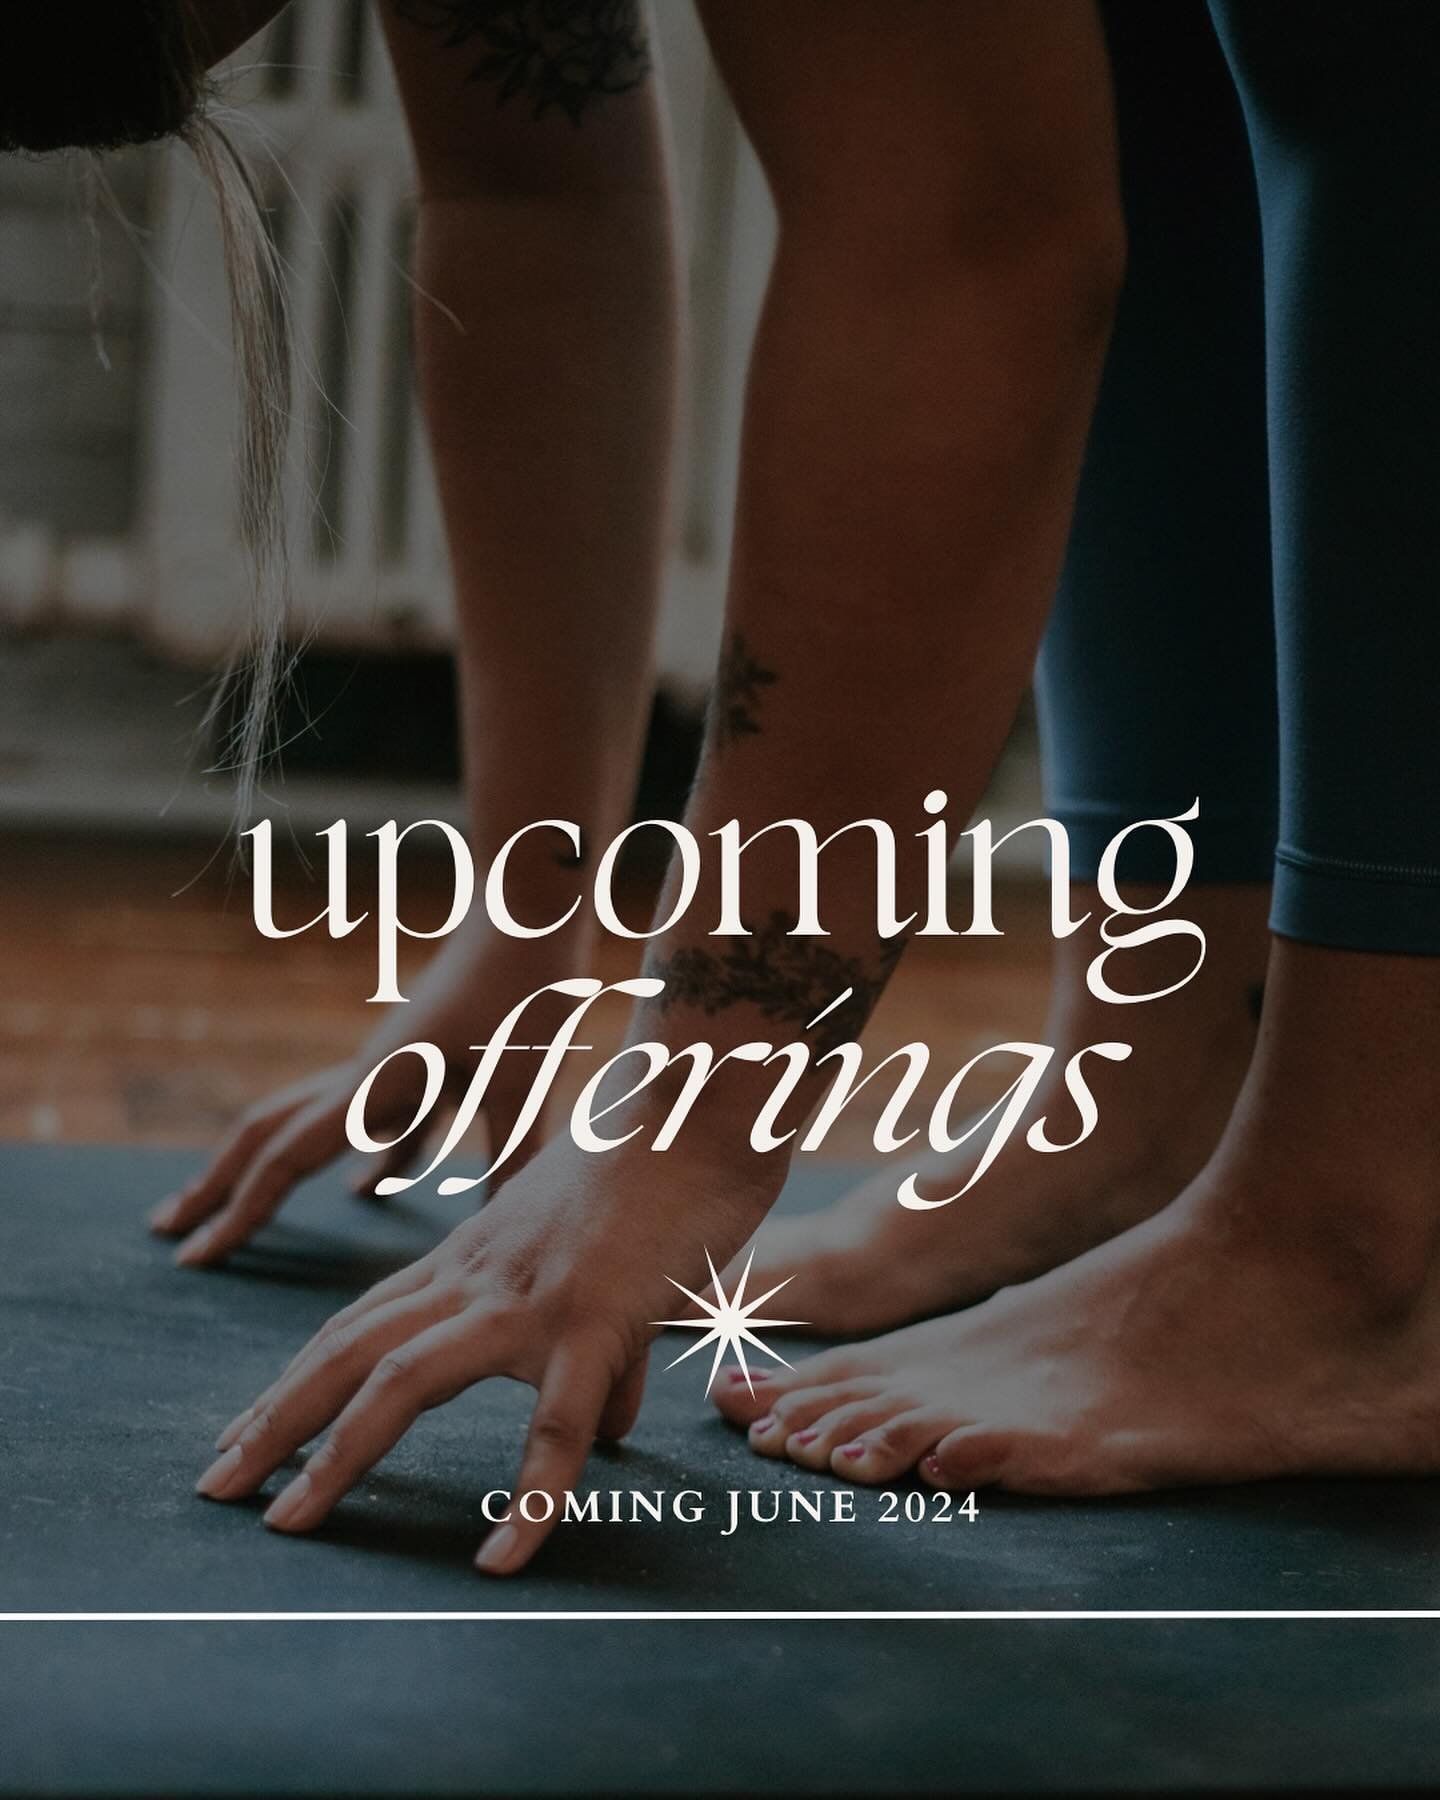 ✨Upcoming New Offerings✨

I&rsquo;m taking a bold leap forward and dedicating all my time and energy to Wild Wandering Creations. 

I am thrilled to announce these new offerings that are now available on the website.

Explore these new offerings:

🧘